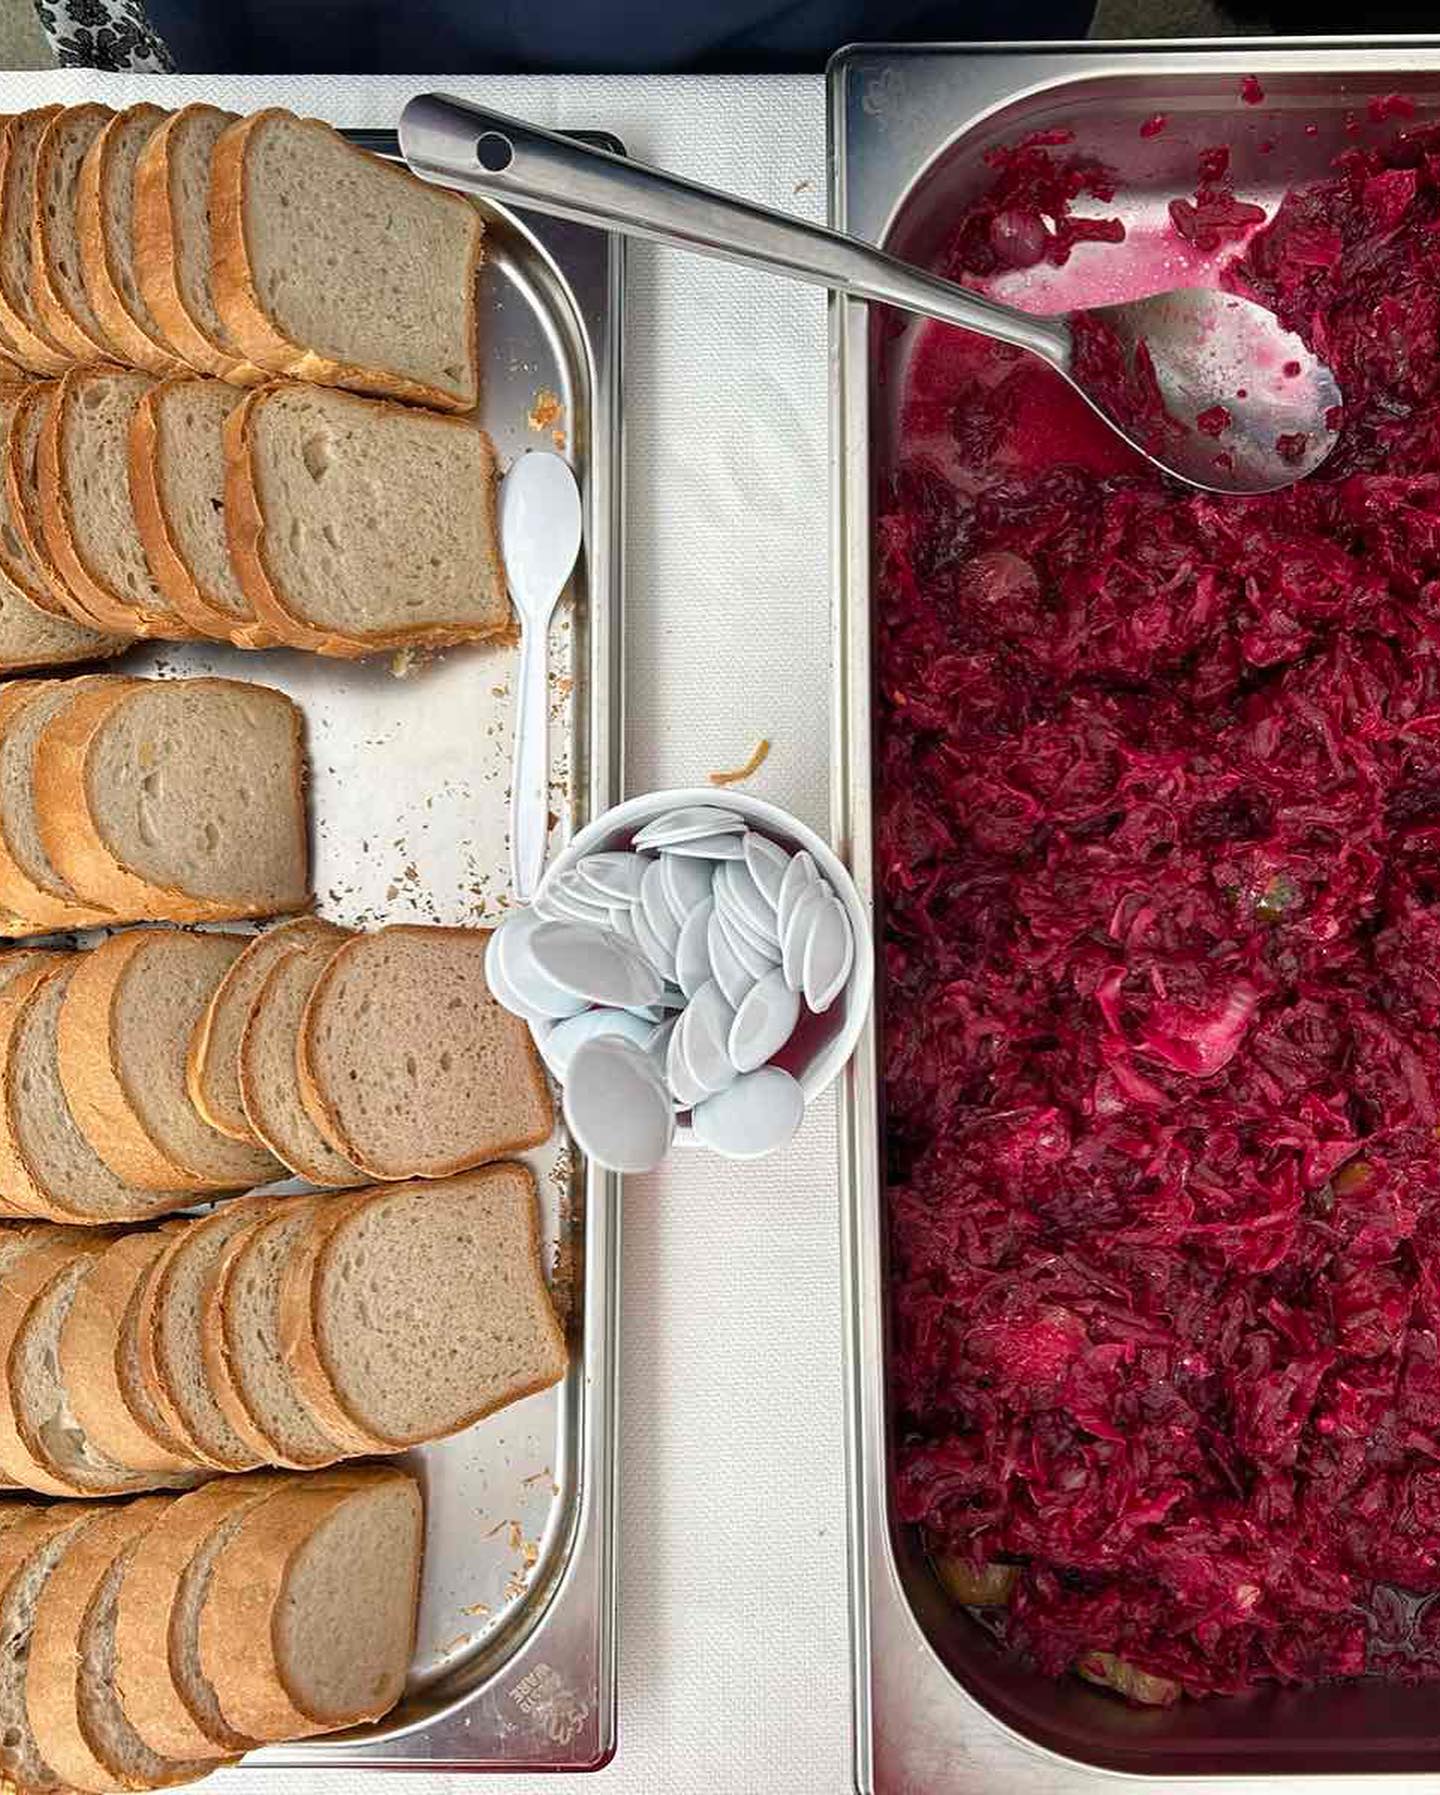 A tray of beets and bread on a table.